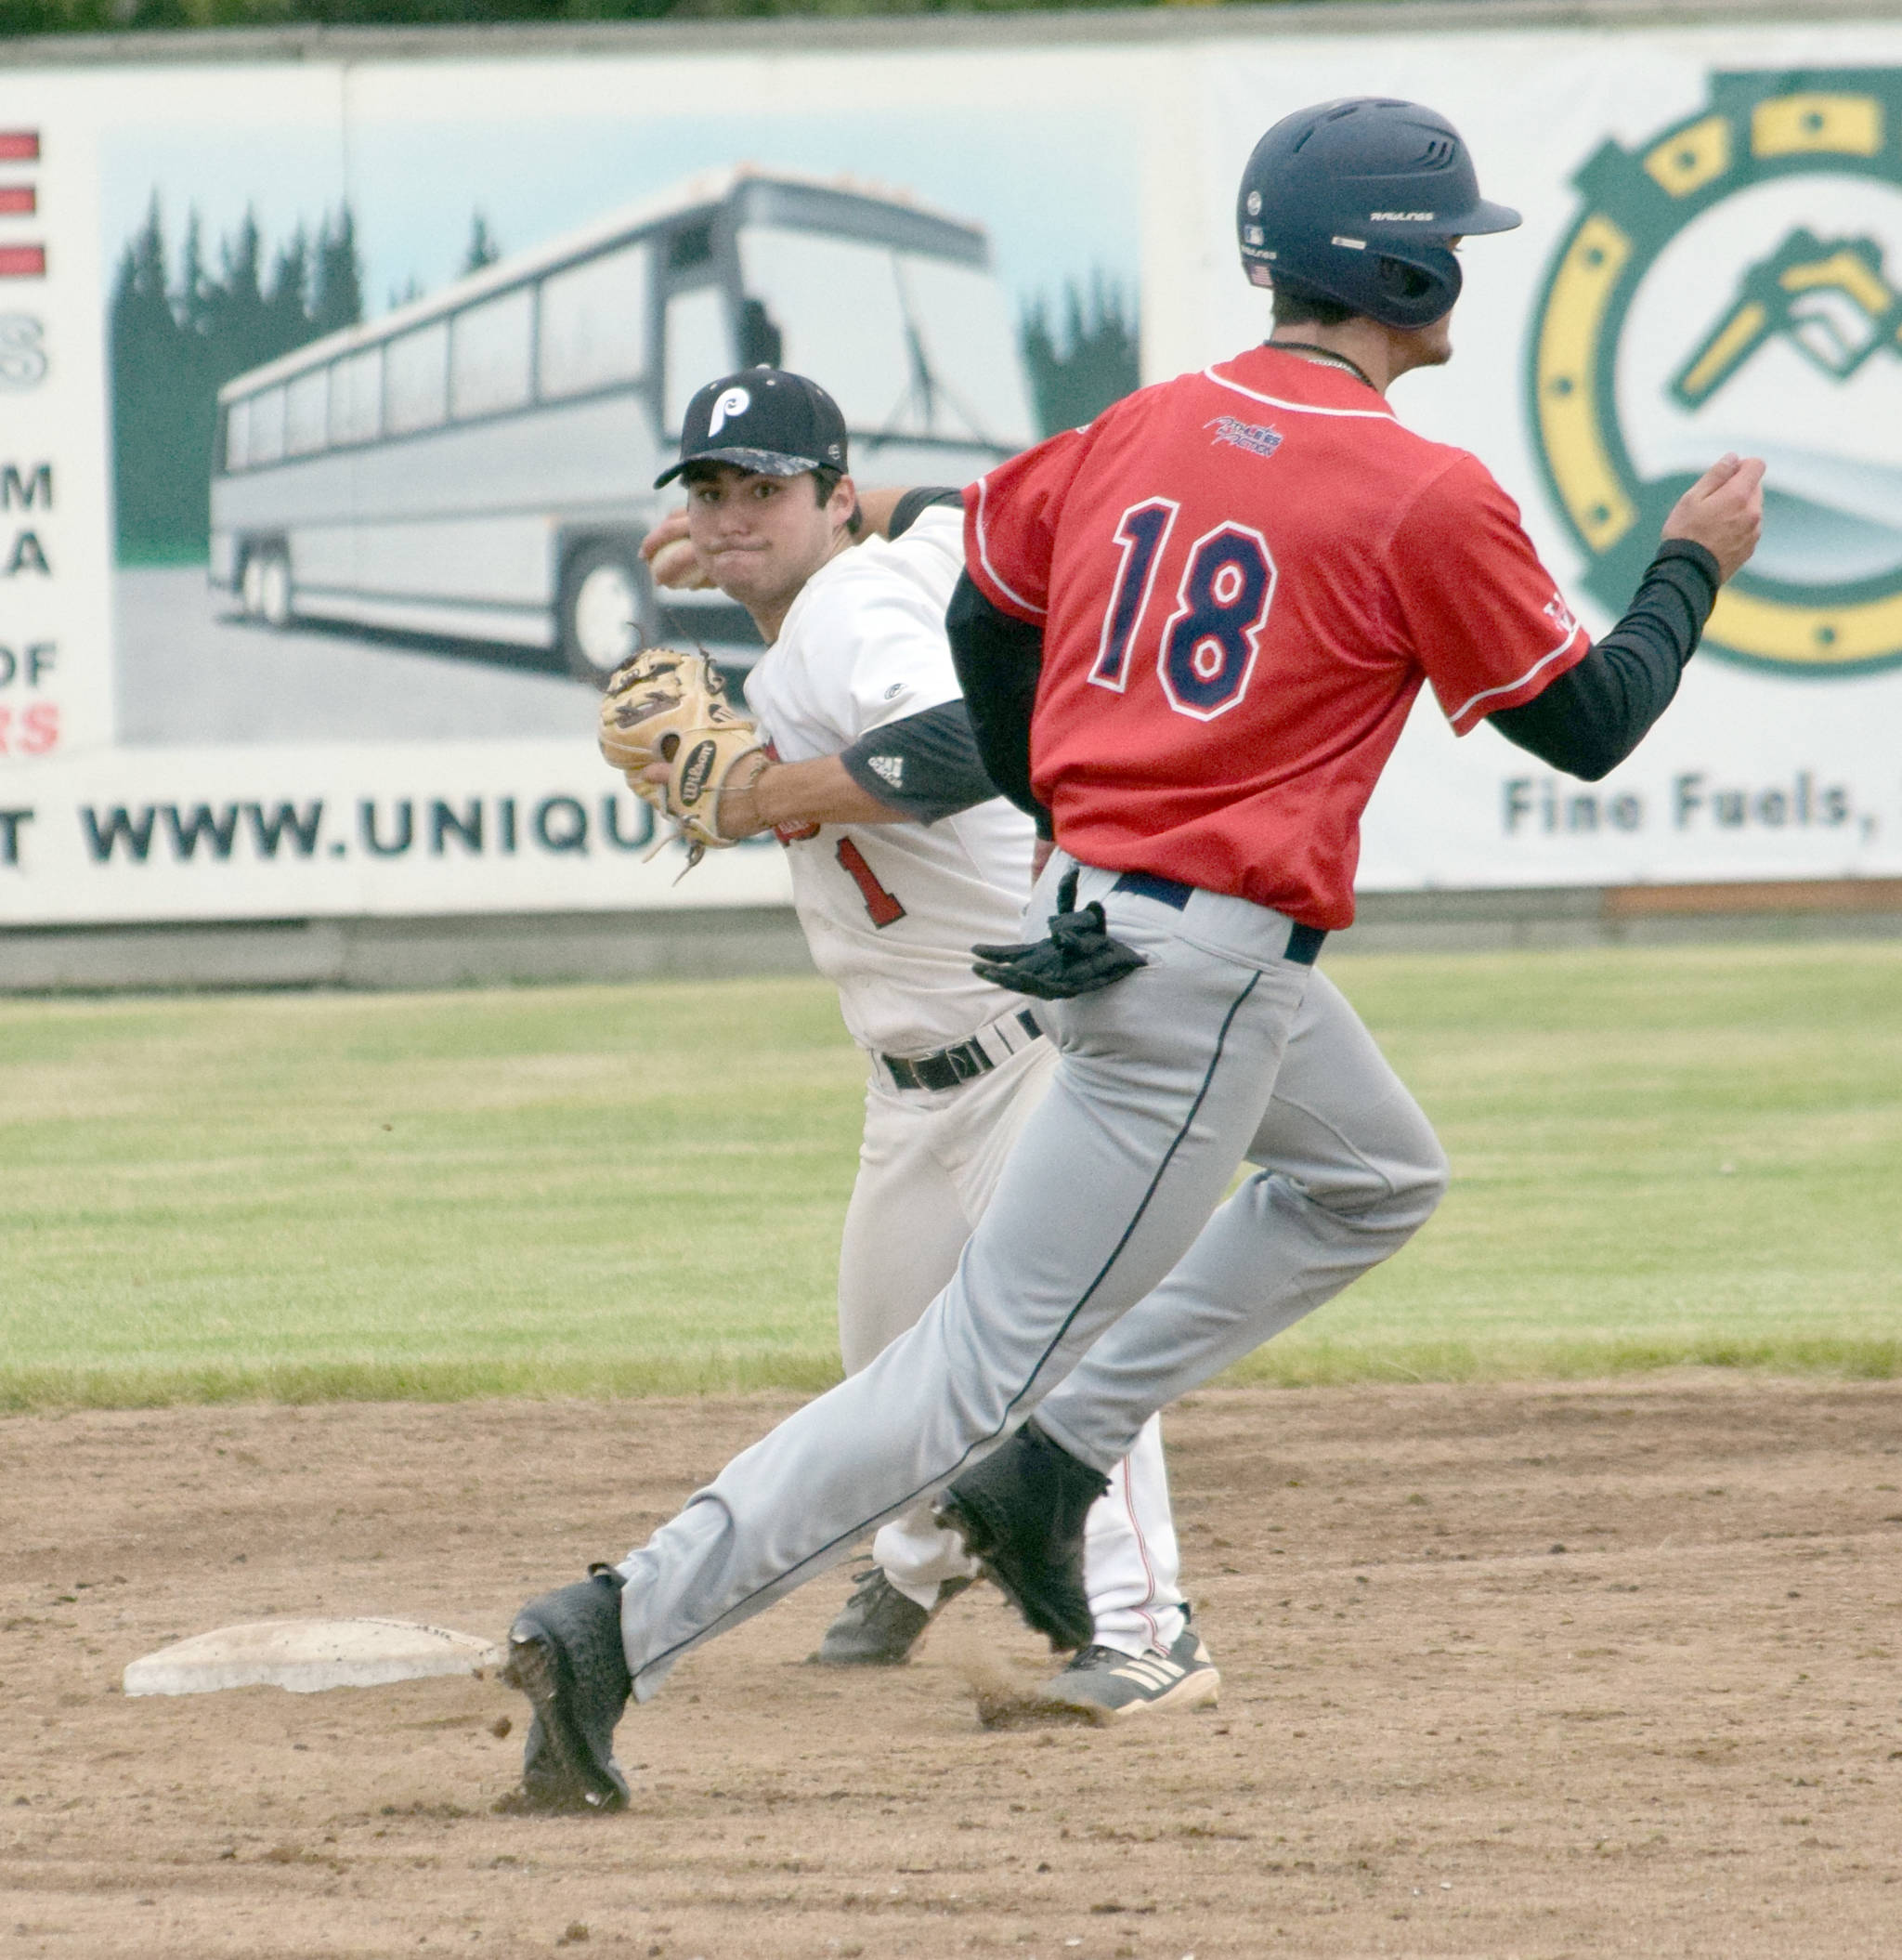 Oilers second baseman Ethan Patrick turns a double play in front of Brandon Cody of the Chugiak-Eagle River Chinooks on Friday, June 15, 2019, at Coral Seymour Memorial Park in Kenai, Alaska. (Photo by Jeff Helminiak/Peninsula Clarion)